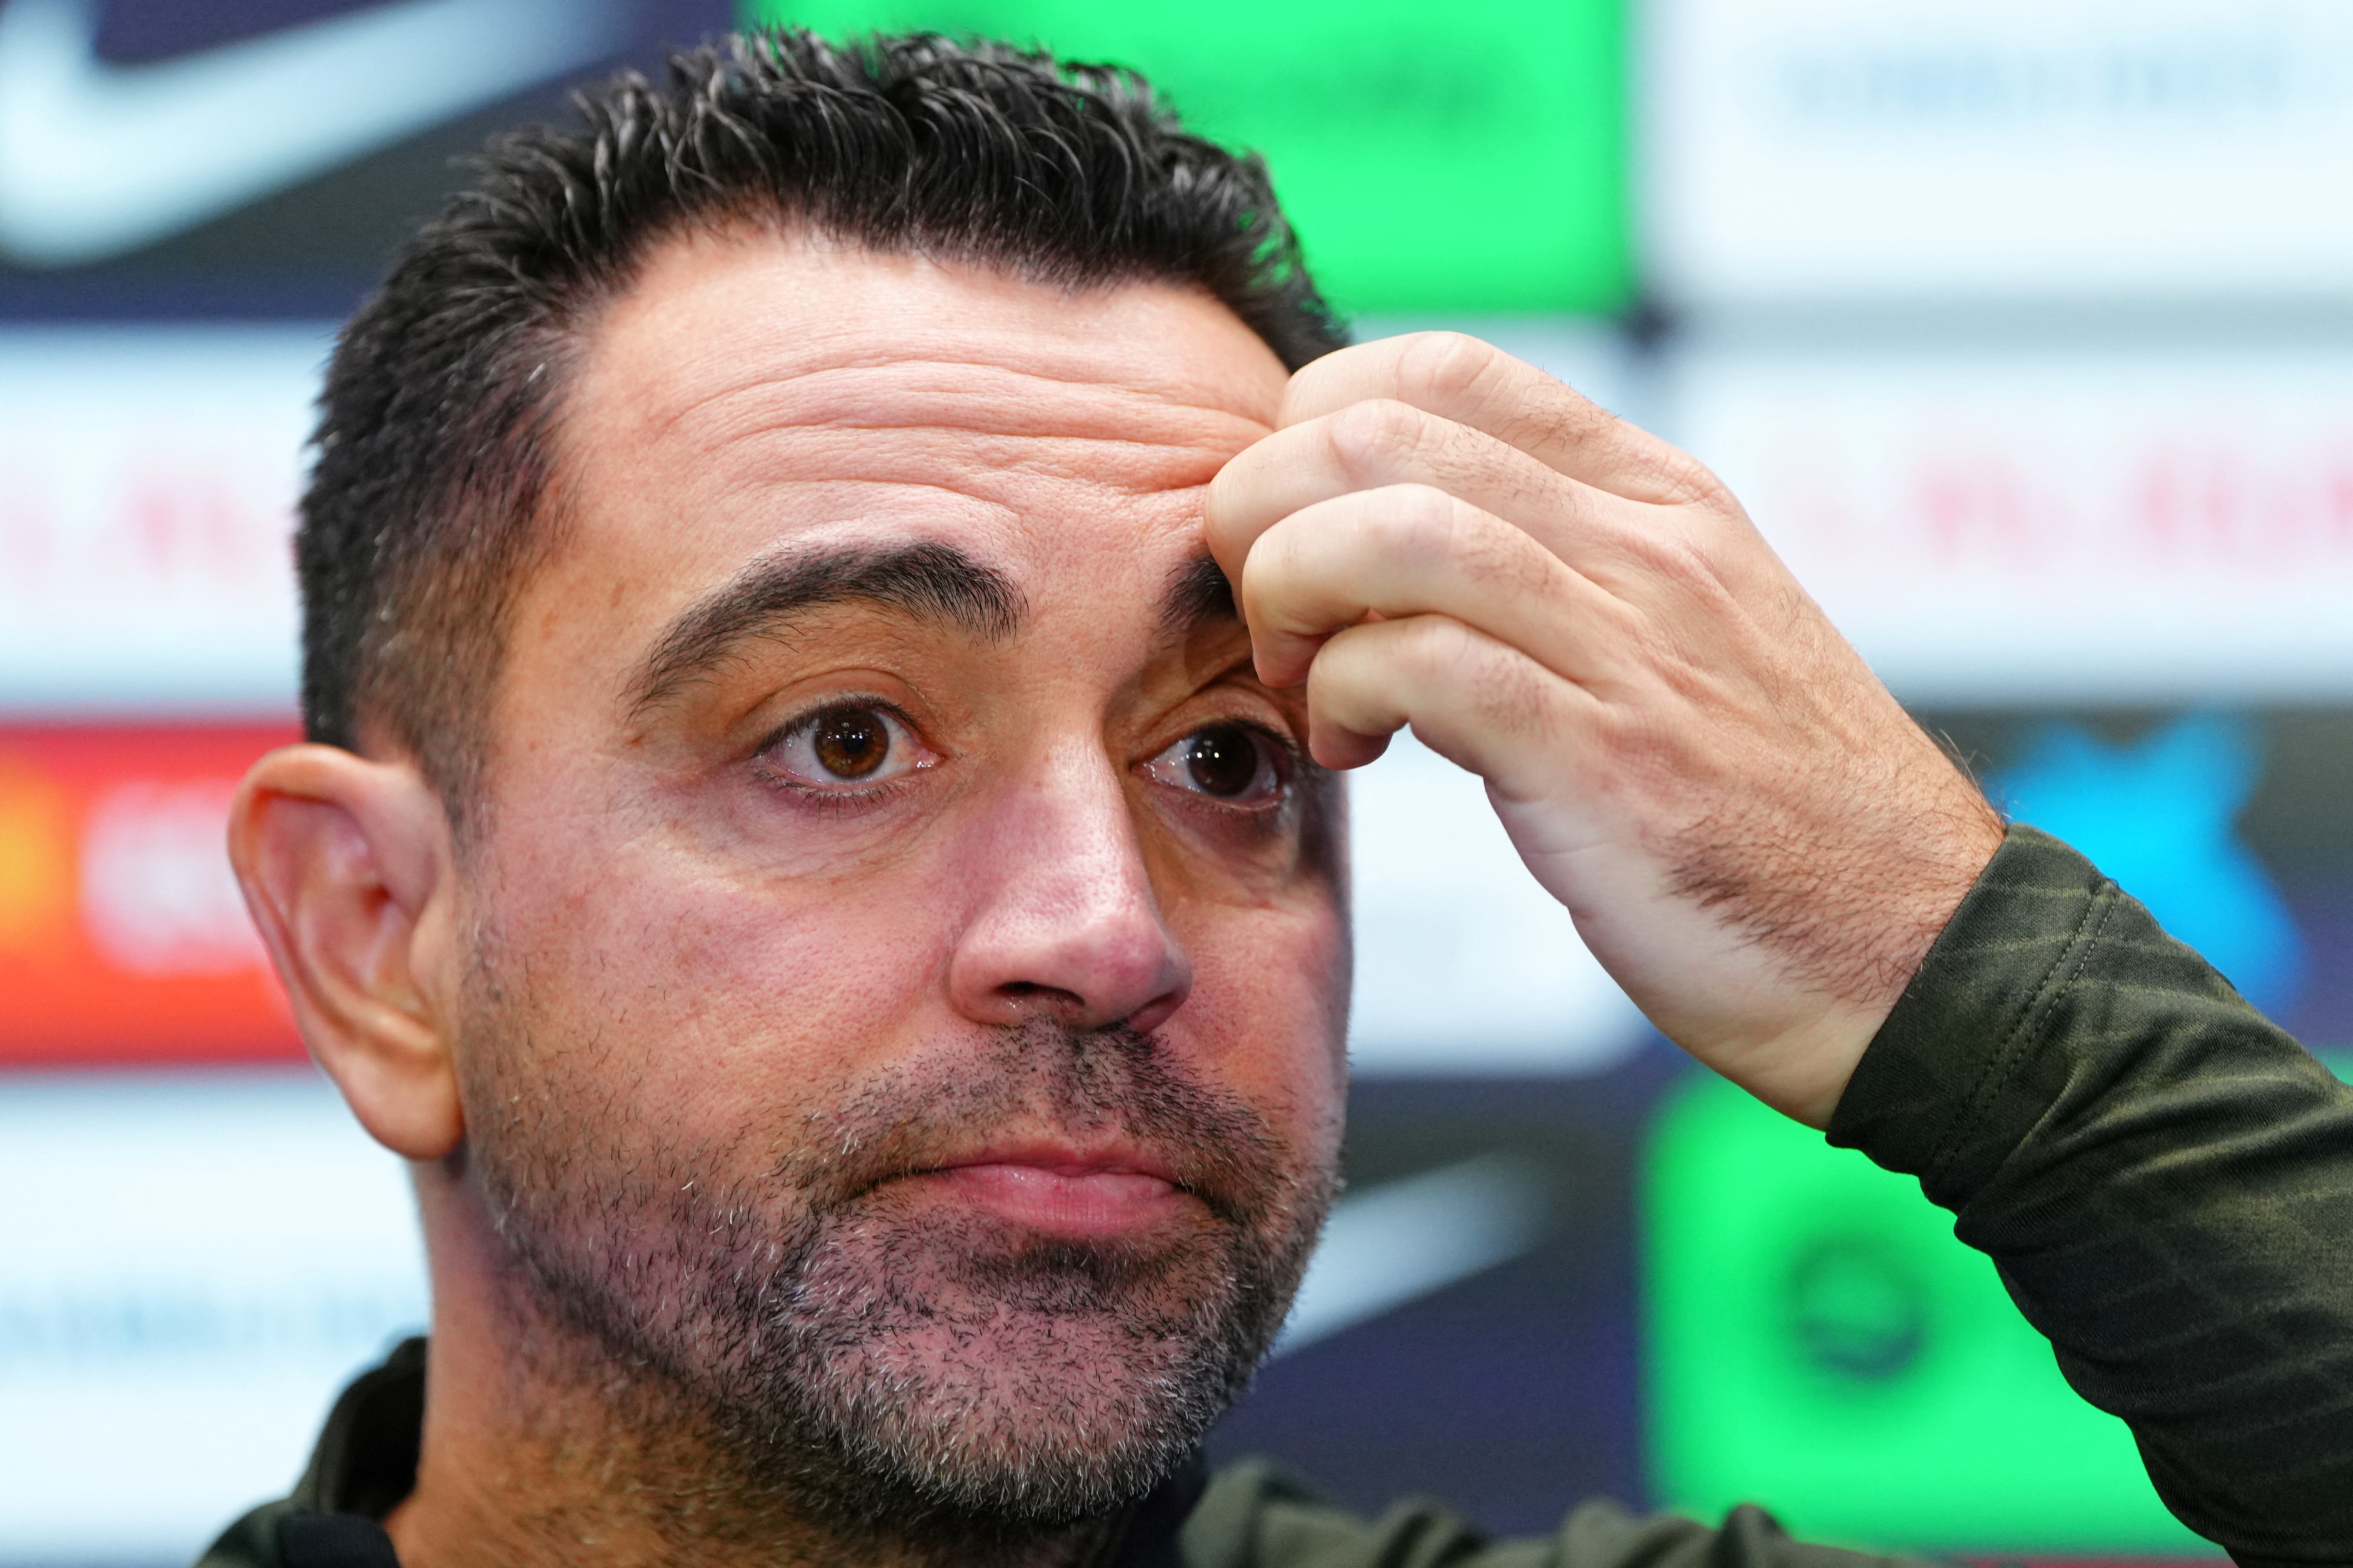 Exclusive: “Really furious” – Barcelona could part ways with Xavi says Romano